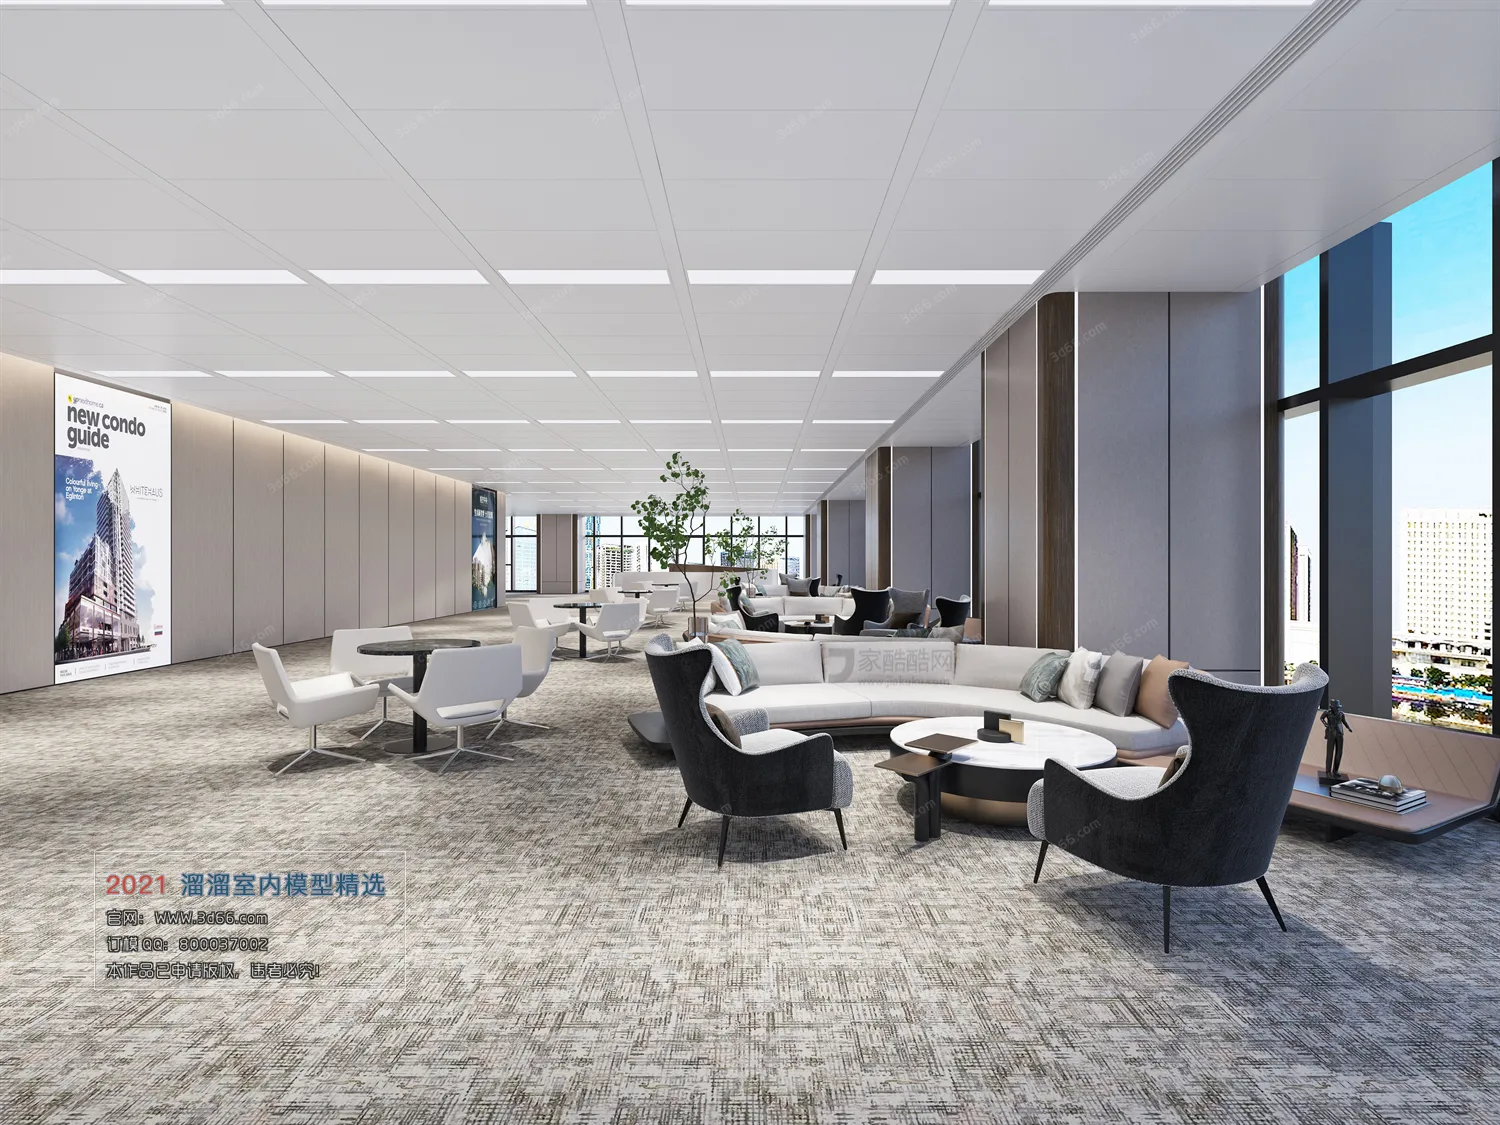 OFFICE, MEETING – A001-Modern style-Vray model